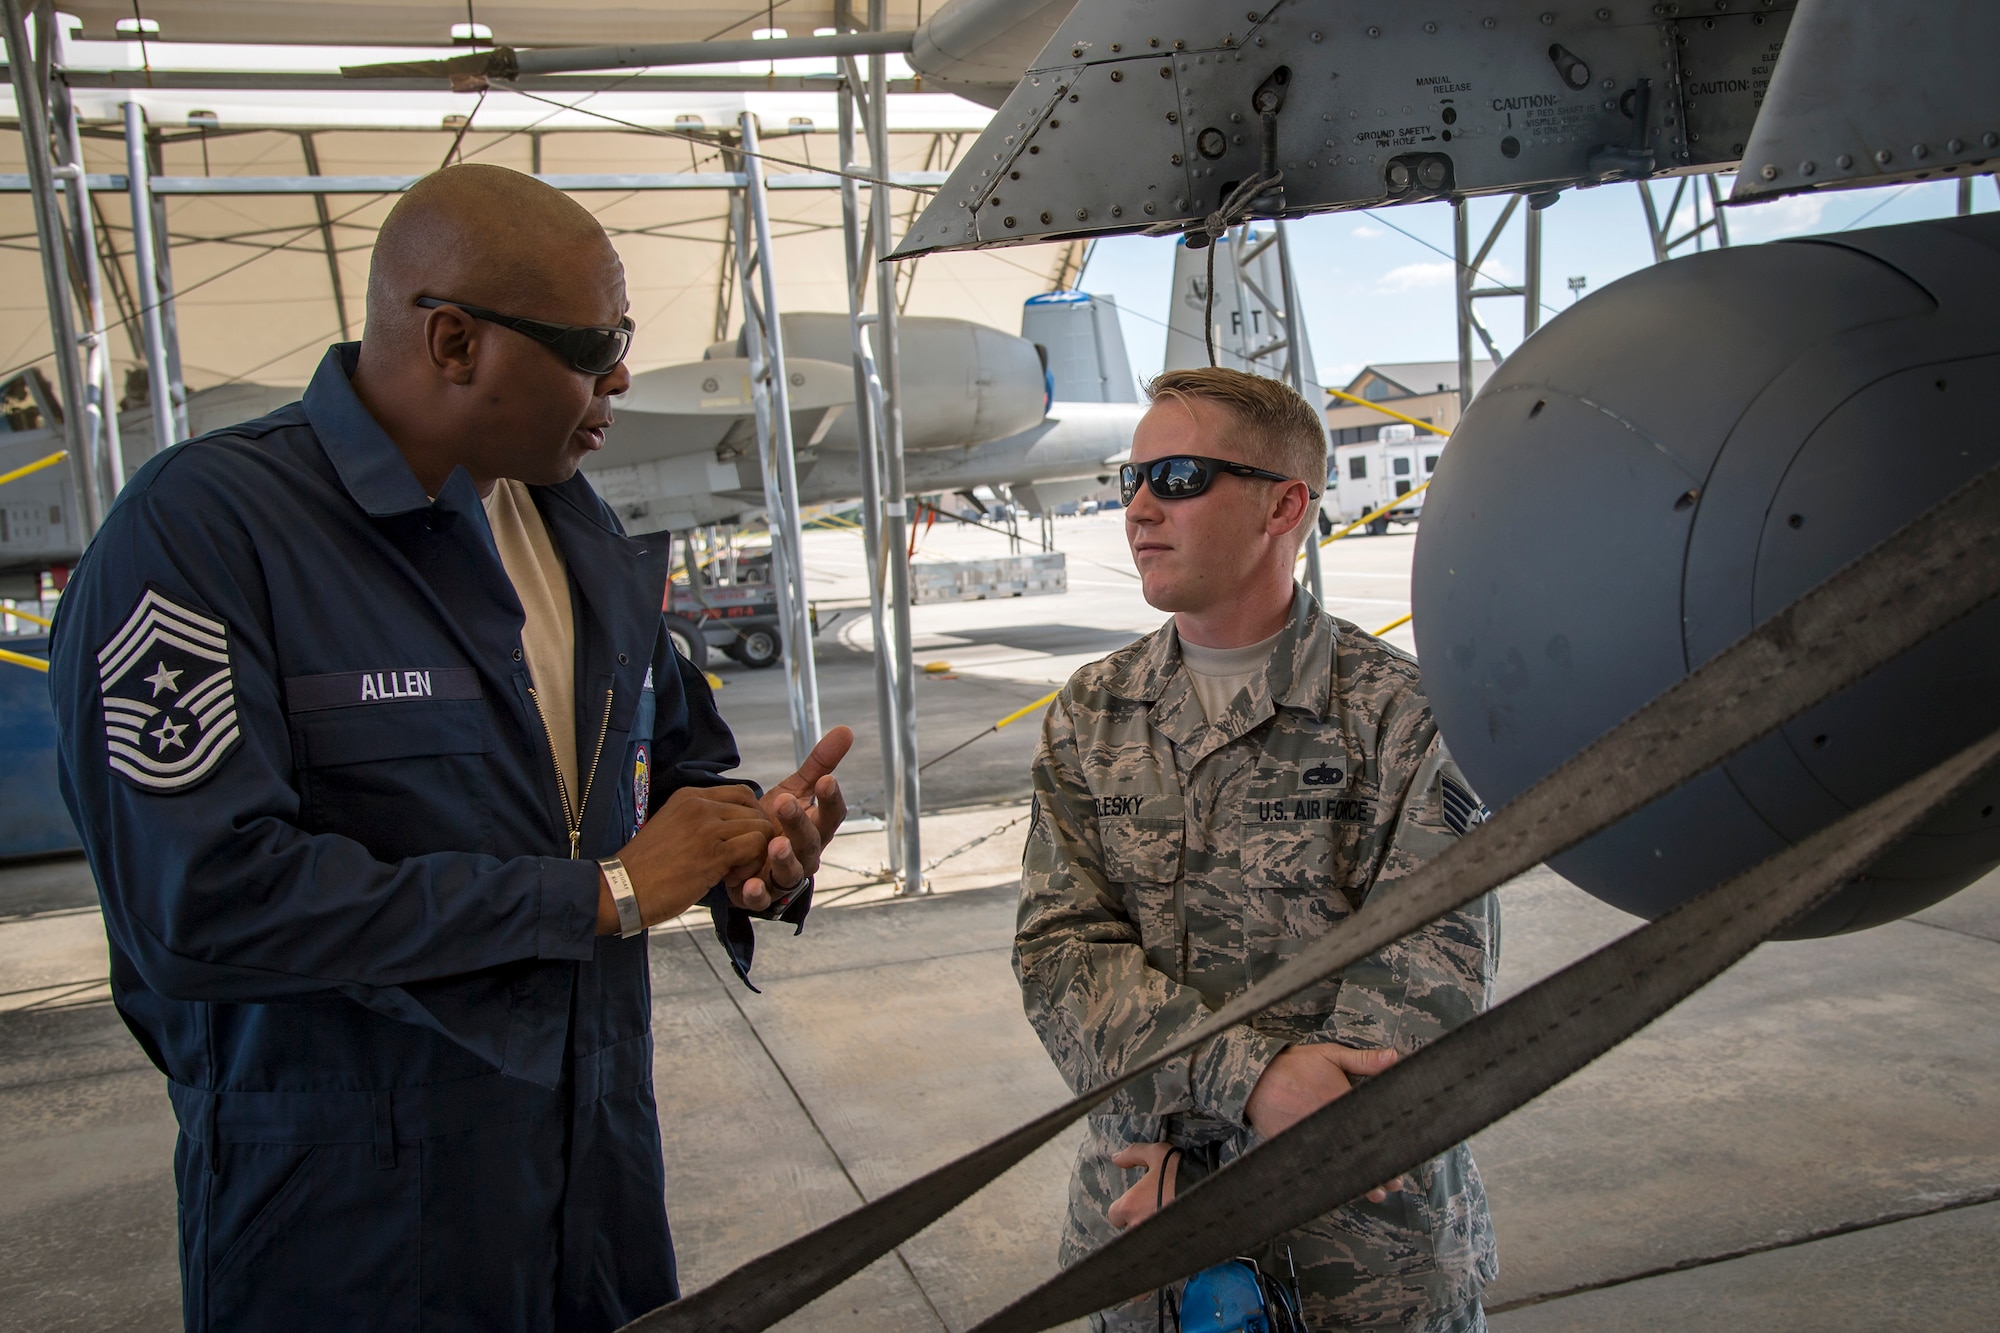 Chief Master Sgt. James Allen, 23d Wing command chief, left, speaks with Staff Sgt. Eric Belesky, 23d Aircraft Maintenance Squadron (AMXS) avionics technician, during an immersion tour, July 10, 2018, at Moody Air Force Base, Ga. Allen toured the 23d AMXS to build rapport and experience the day to day operations of maintenance Airmen. Throughout his visit, Allen was able to speak with Airmen and hear their opinions and ideas behind the continued success of the AMXS. (U.S. Air Force photo by Airman 1st Class Eugene Oliver)